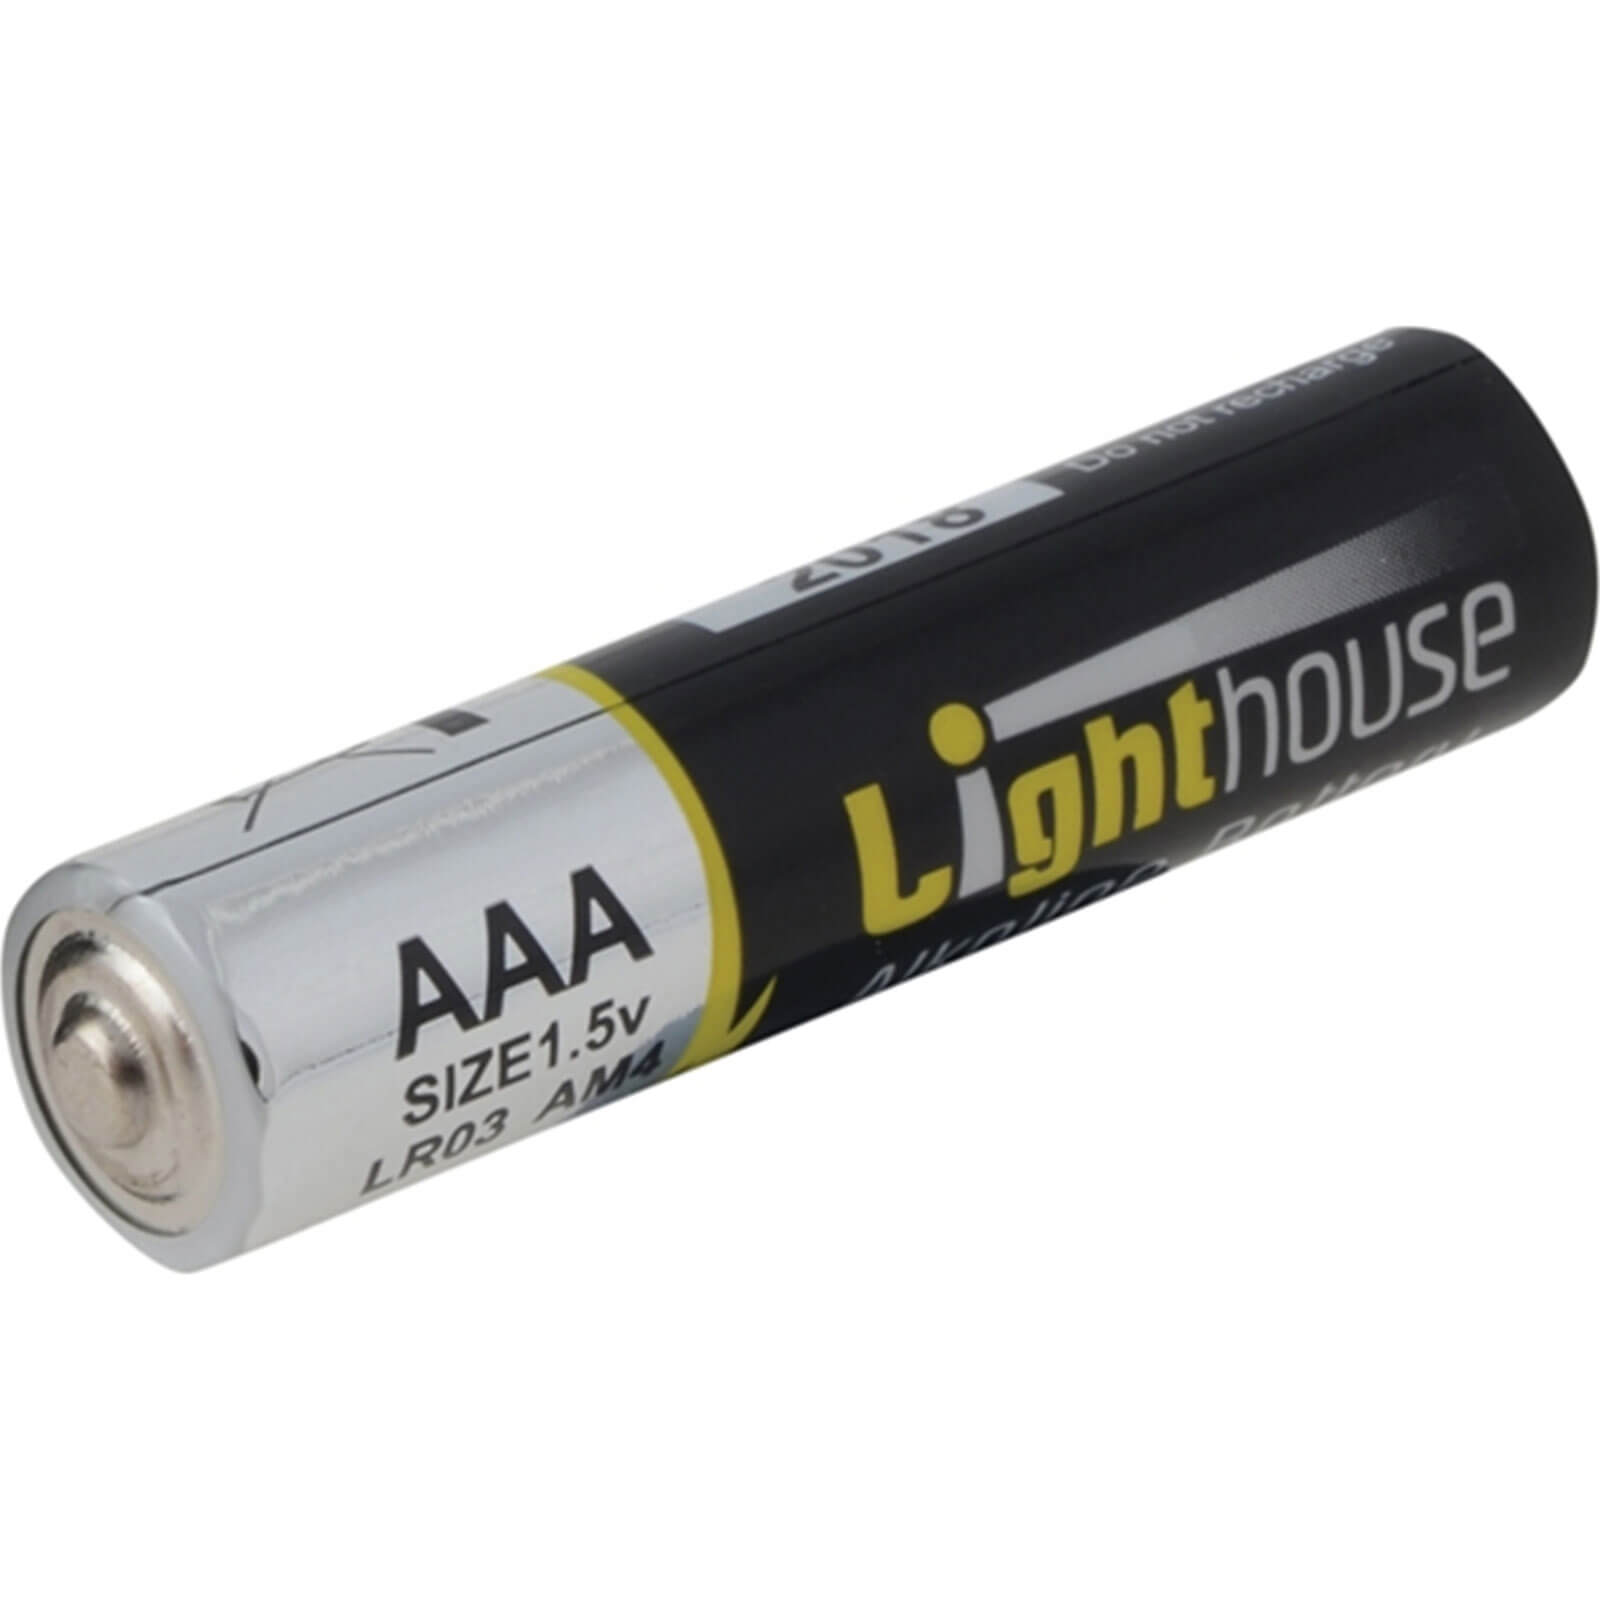 Image of Lighthouse LR03 Extra Long Life AAA Alkaline Batteries Pack of 4